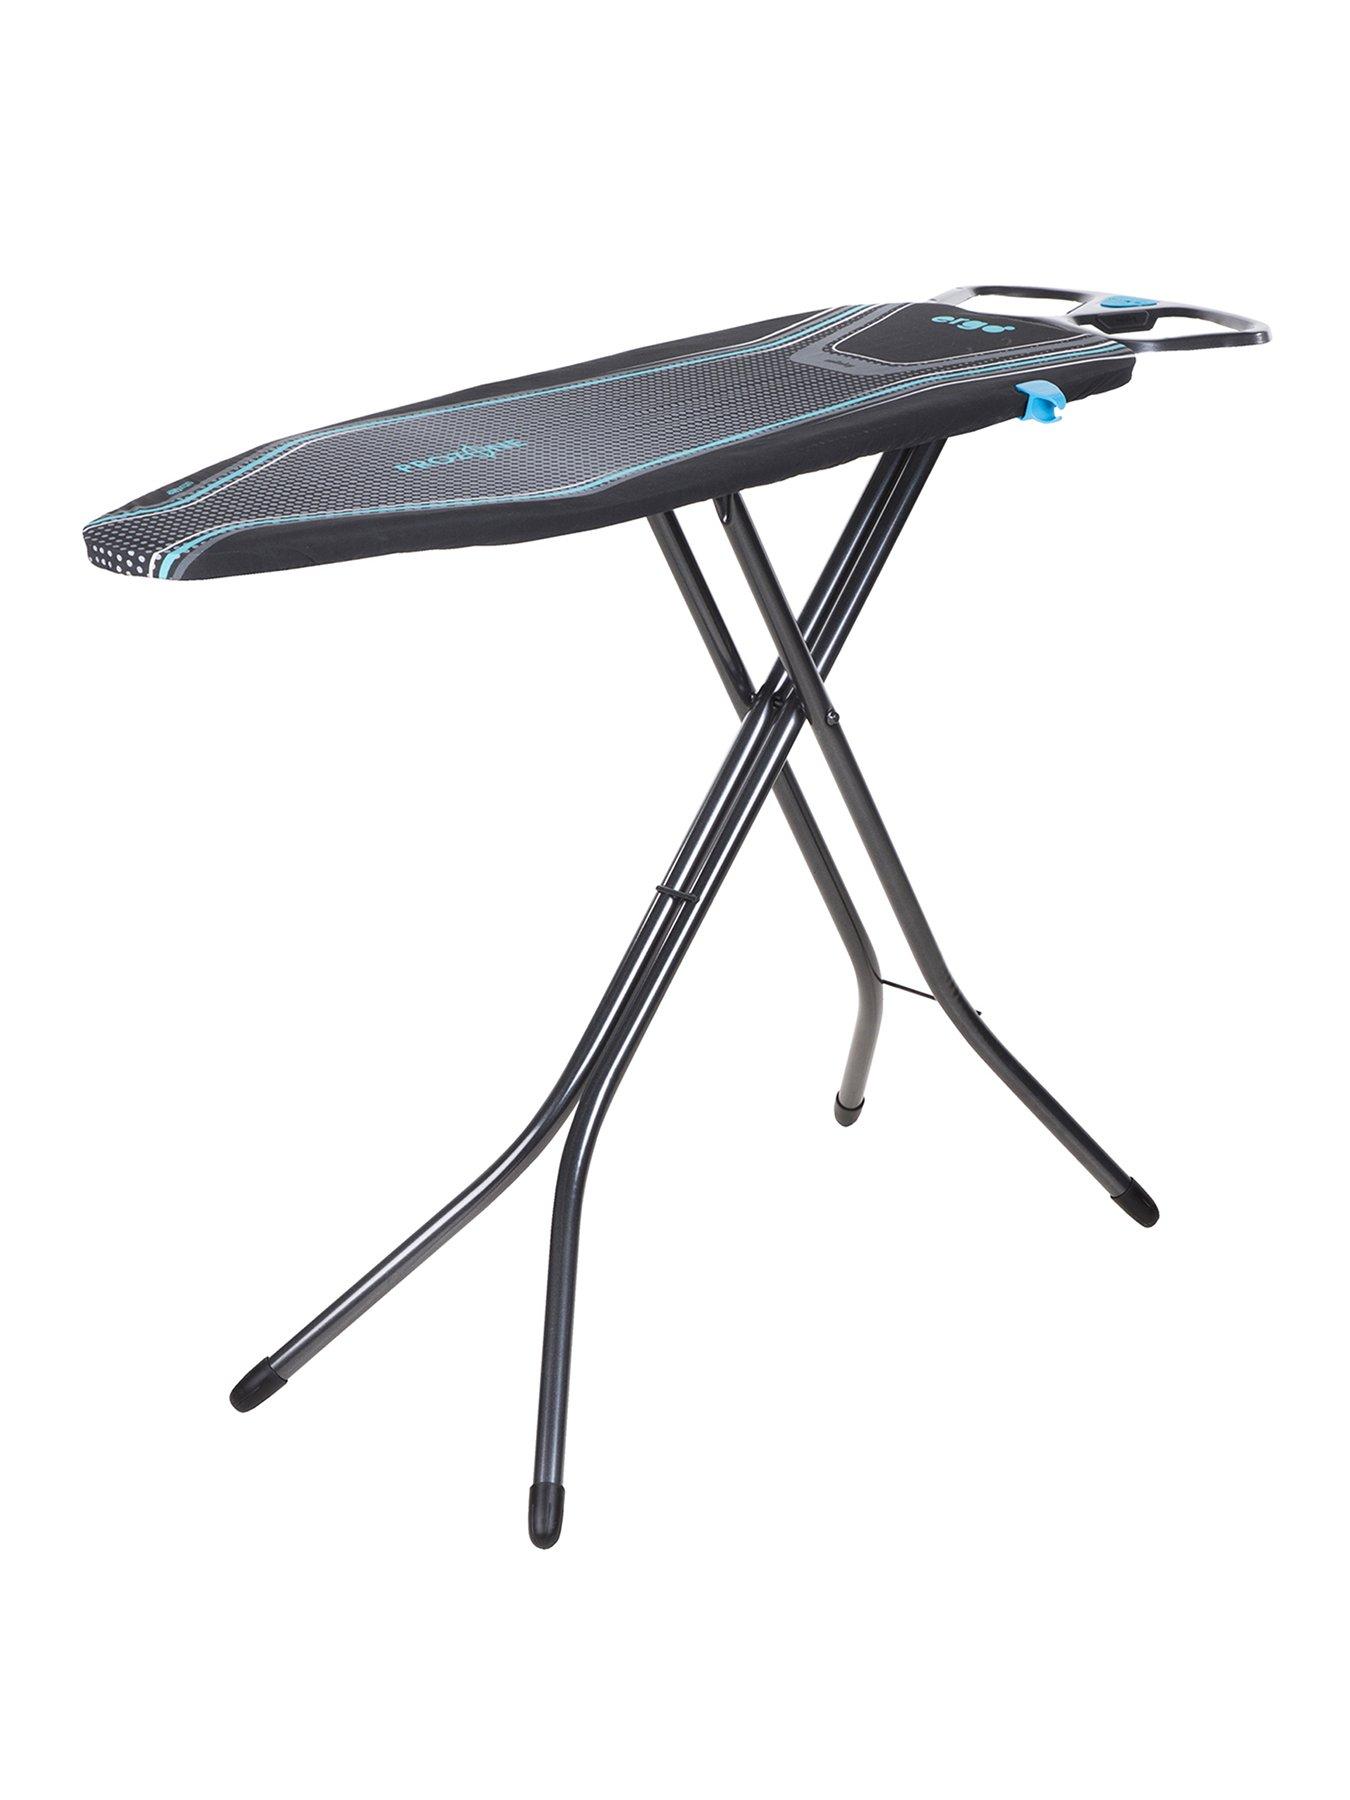 Foldable Ironing Board with Heat Resistant Cover, Steam Iron Rest and  Non-Slip Legs - Sturdy Metal Frame (13 x 34 x 53 Inches) (Silver Gray)